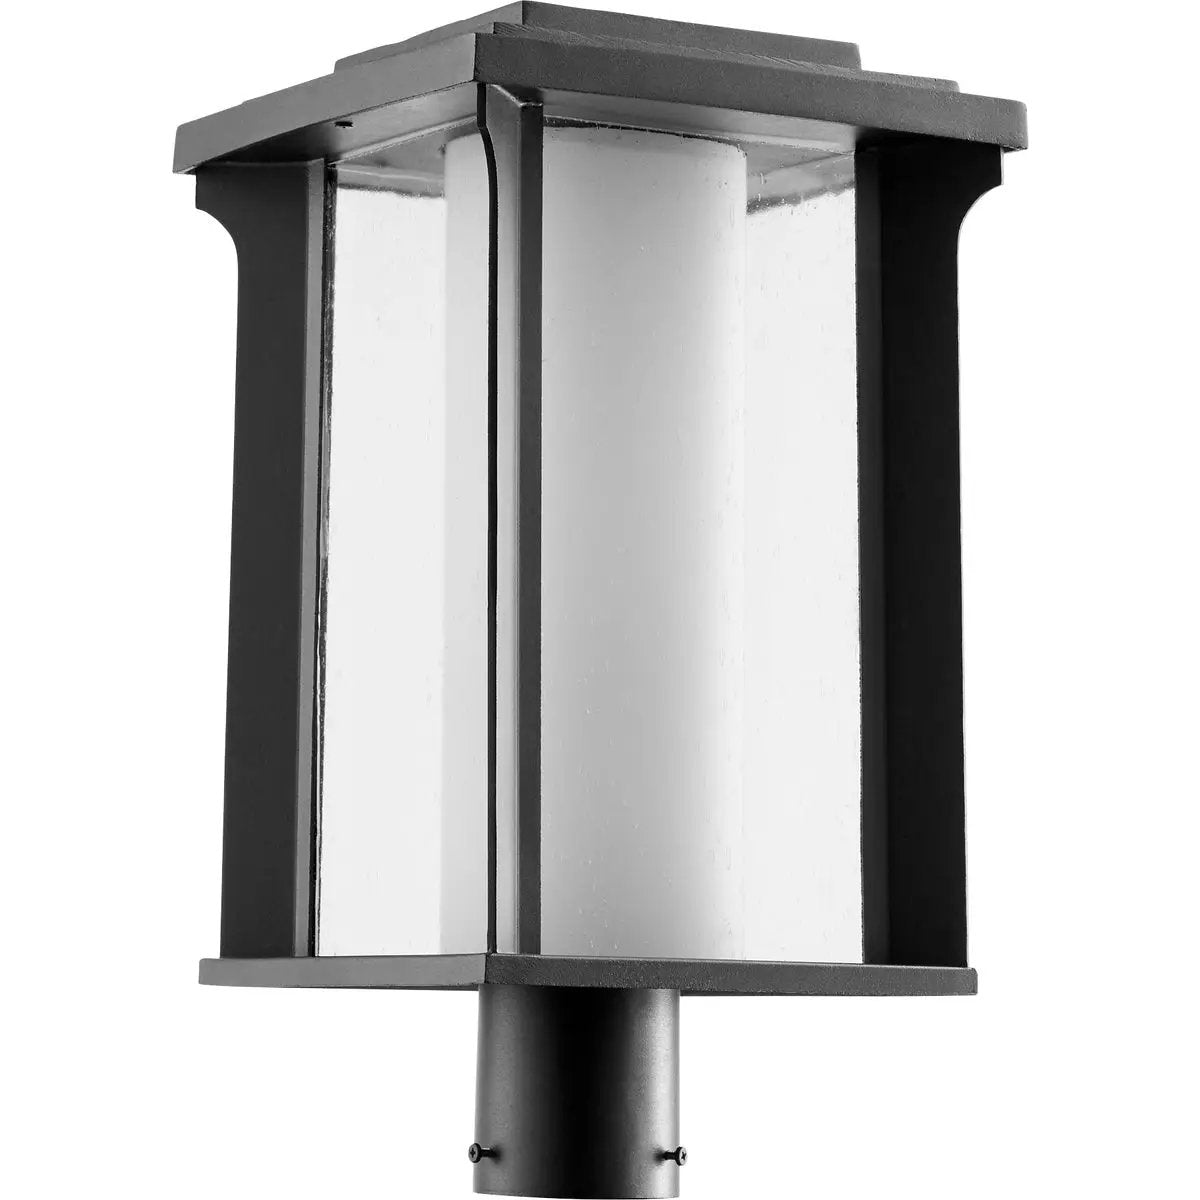 Transitional Outdoor Post Light with molded details and boxed design, featuring a noir finish and satin opal glass cylinder diffuser.